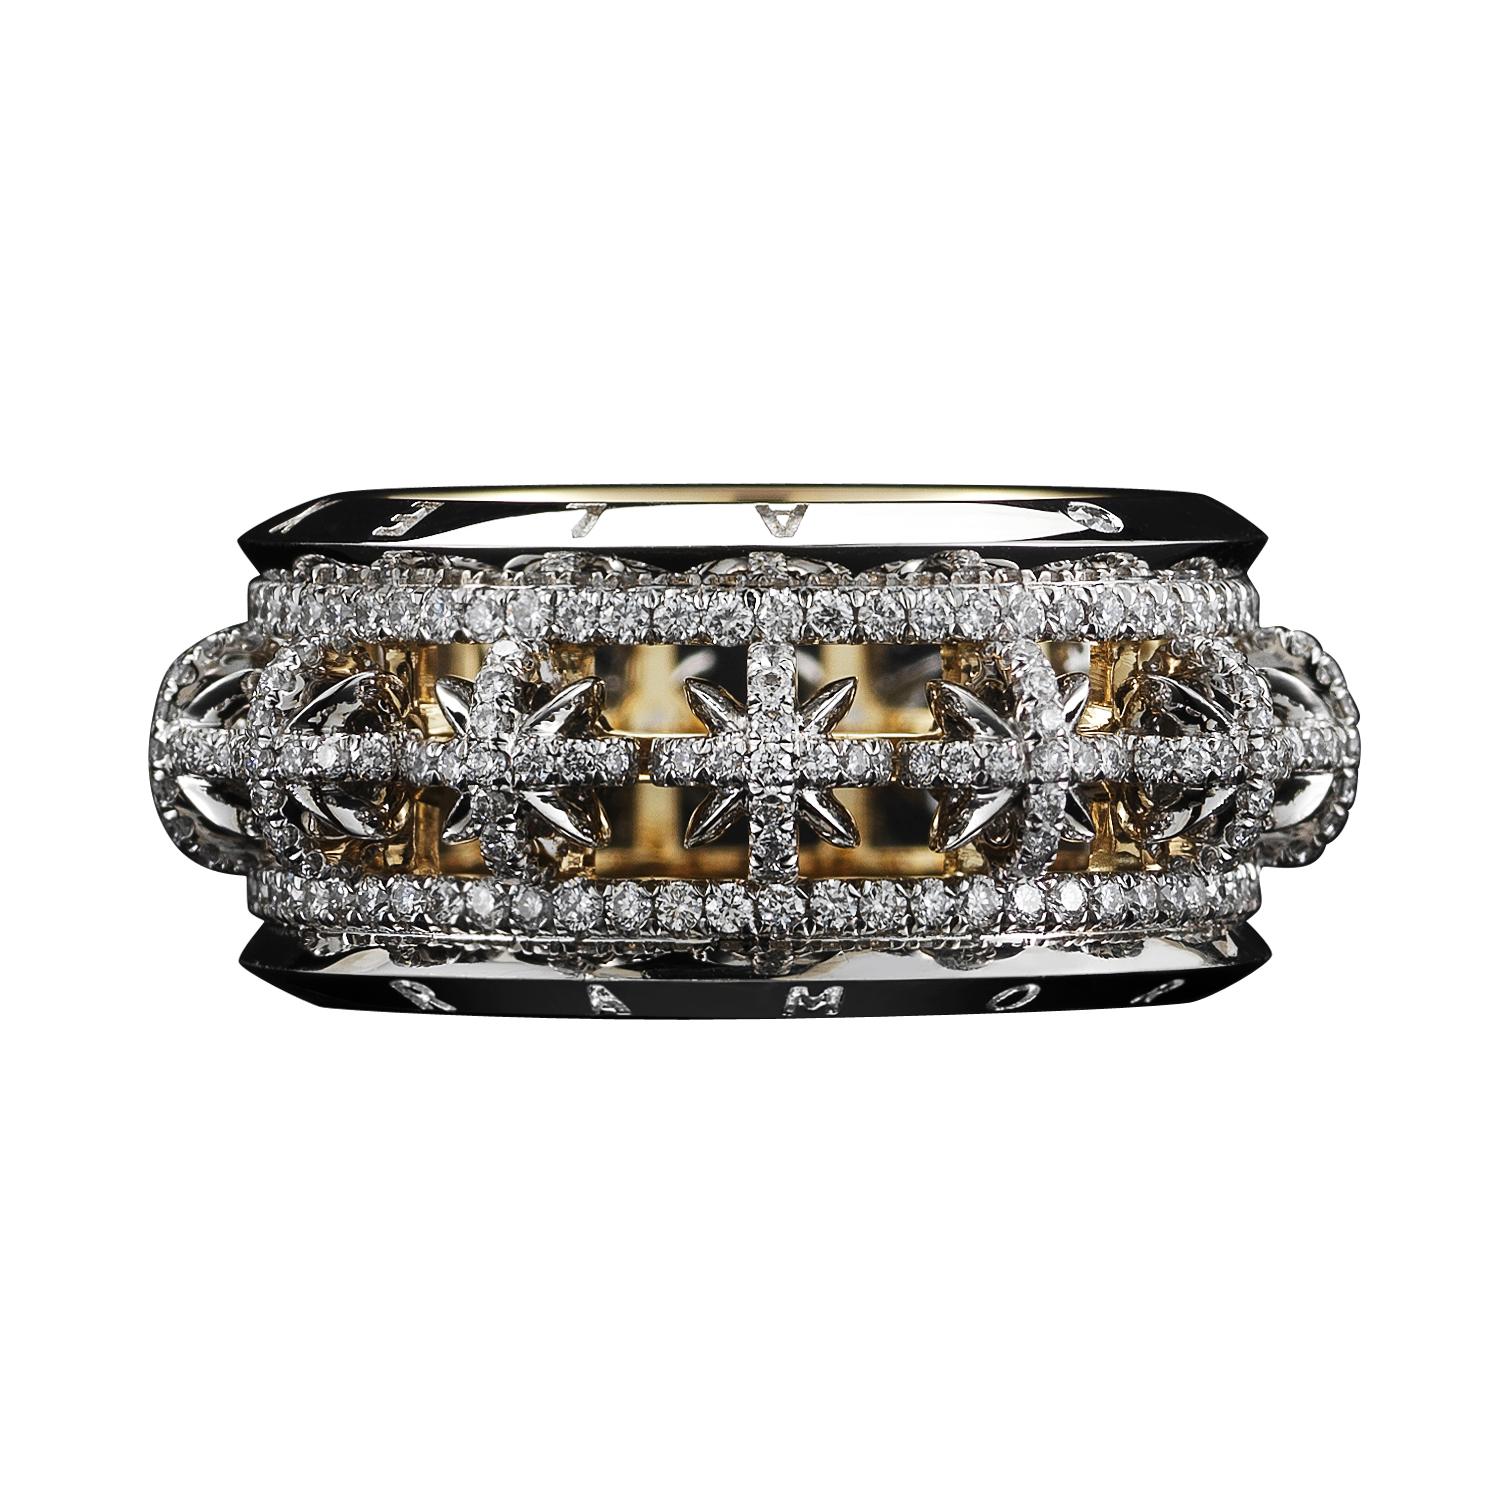 A 5mm Alexandra Mor signature snowflake Diamond eternity band featuring 451 Diamonds set in Alexandra Mor signature floating melee and knife edged wire. Ring is set in platinum and 18 karat yellow gold. Total Diamonds weight is 1.34 carats. Limited